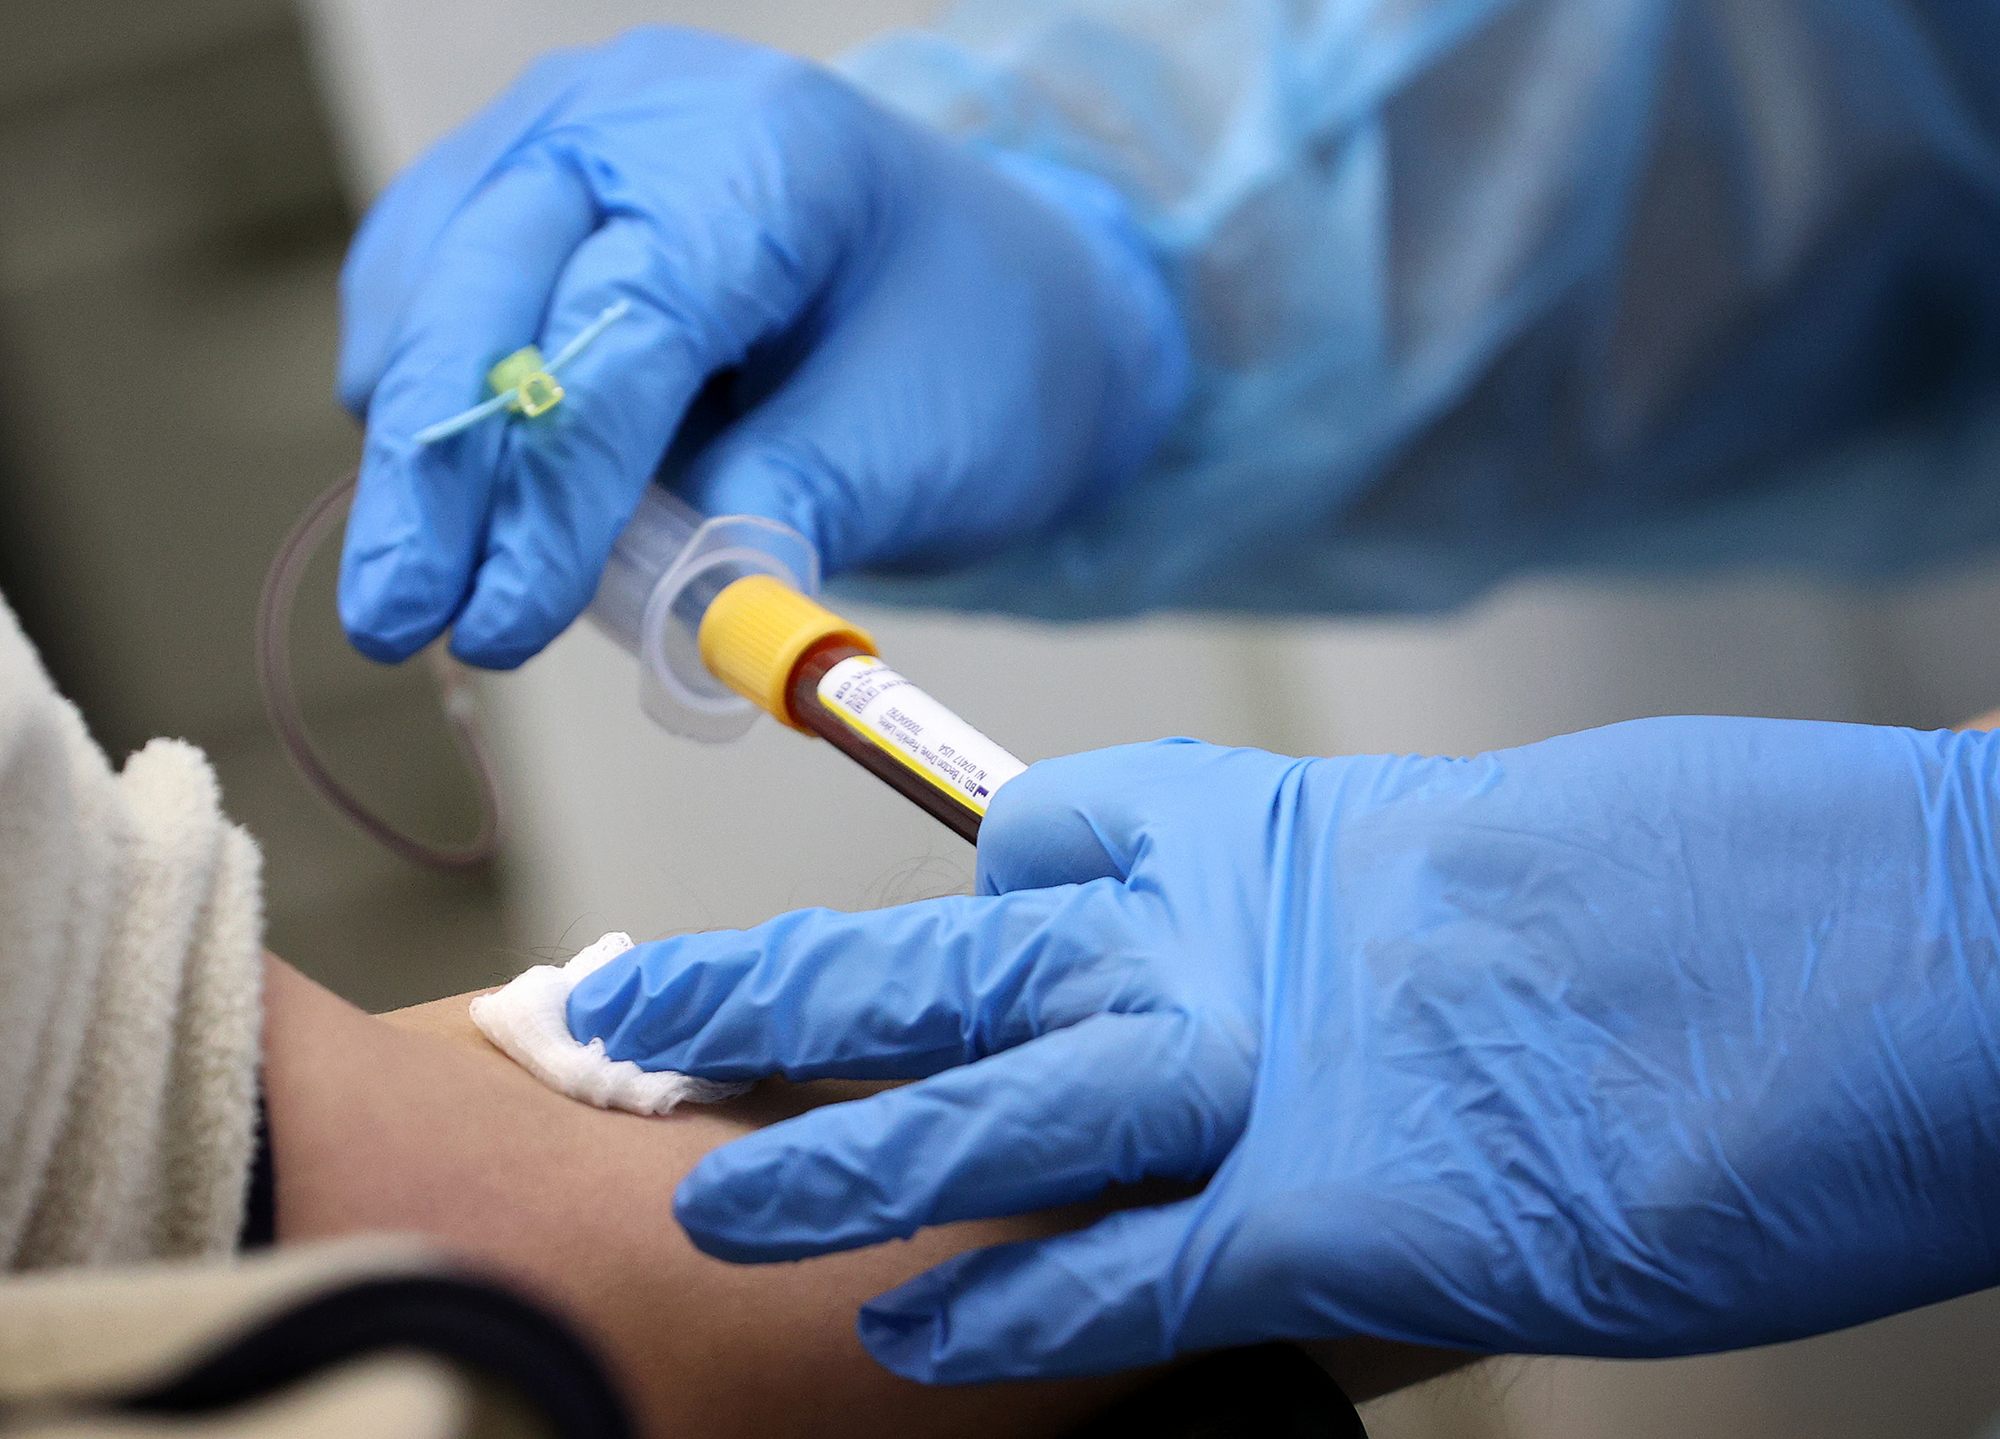 A resident has their blood drawn for an antibody test for the coronavirus - also called a serology test - on June 16, 2020 in Washington, DC. 